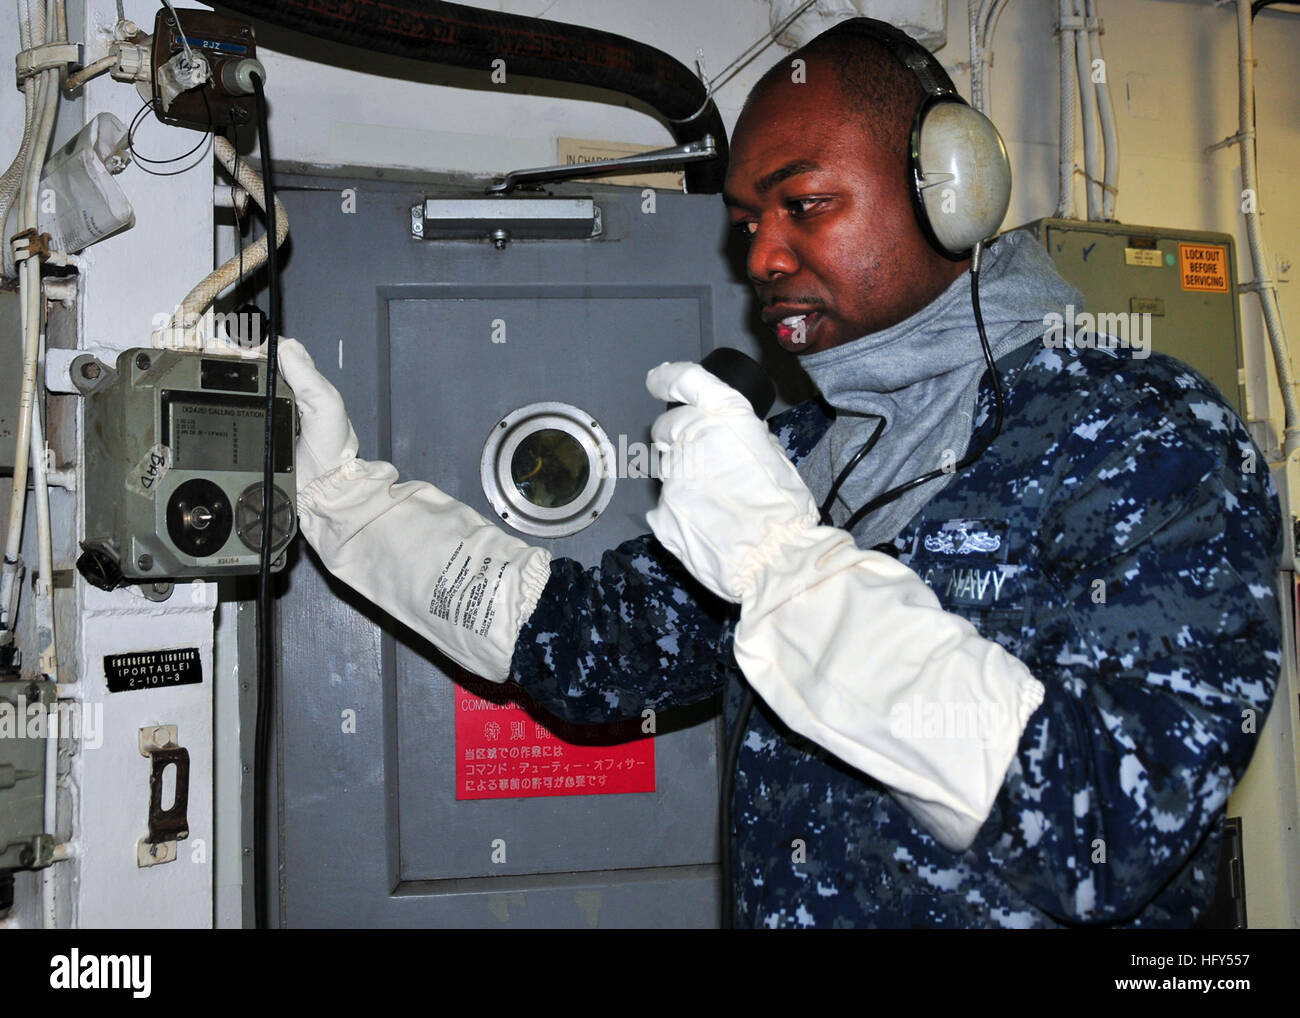 111117-N-GE301-009 POLARIS POINT, Guam (Nov. 17, 2011)  Interior Communications Electrician 1st Class Kevin Sampson, assigned to the submarine tender USS Frank Cable (AS 40), establishes communications as part of his duties as phone talker during a casualty drill on the ship.  Frank Cable conducts maintenance and support of submarines and surface vessels deployed in the 7th Fleet area of responsibility. (U.S. Navy photo by Mass Communication Specialist 2nd Class Gabrielle Blake/Released) US Navy 111117-N-GE301-009 Interior Communications Electrician 1st Class Kevin Sampson establishes communic Stock Photo